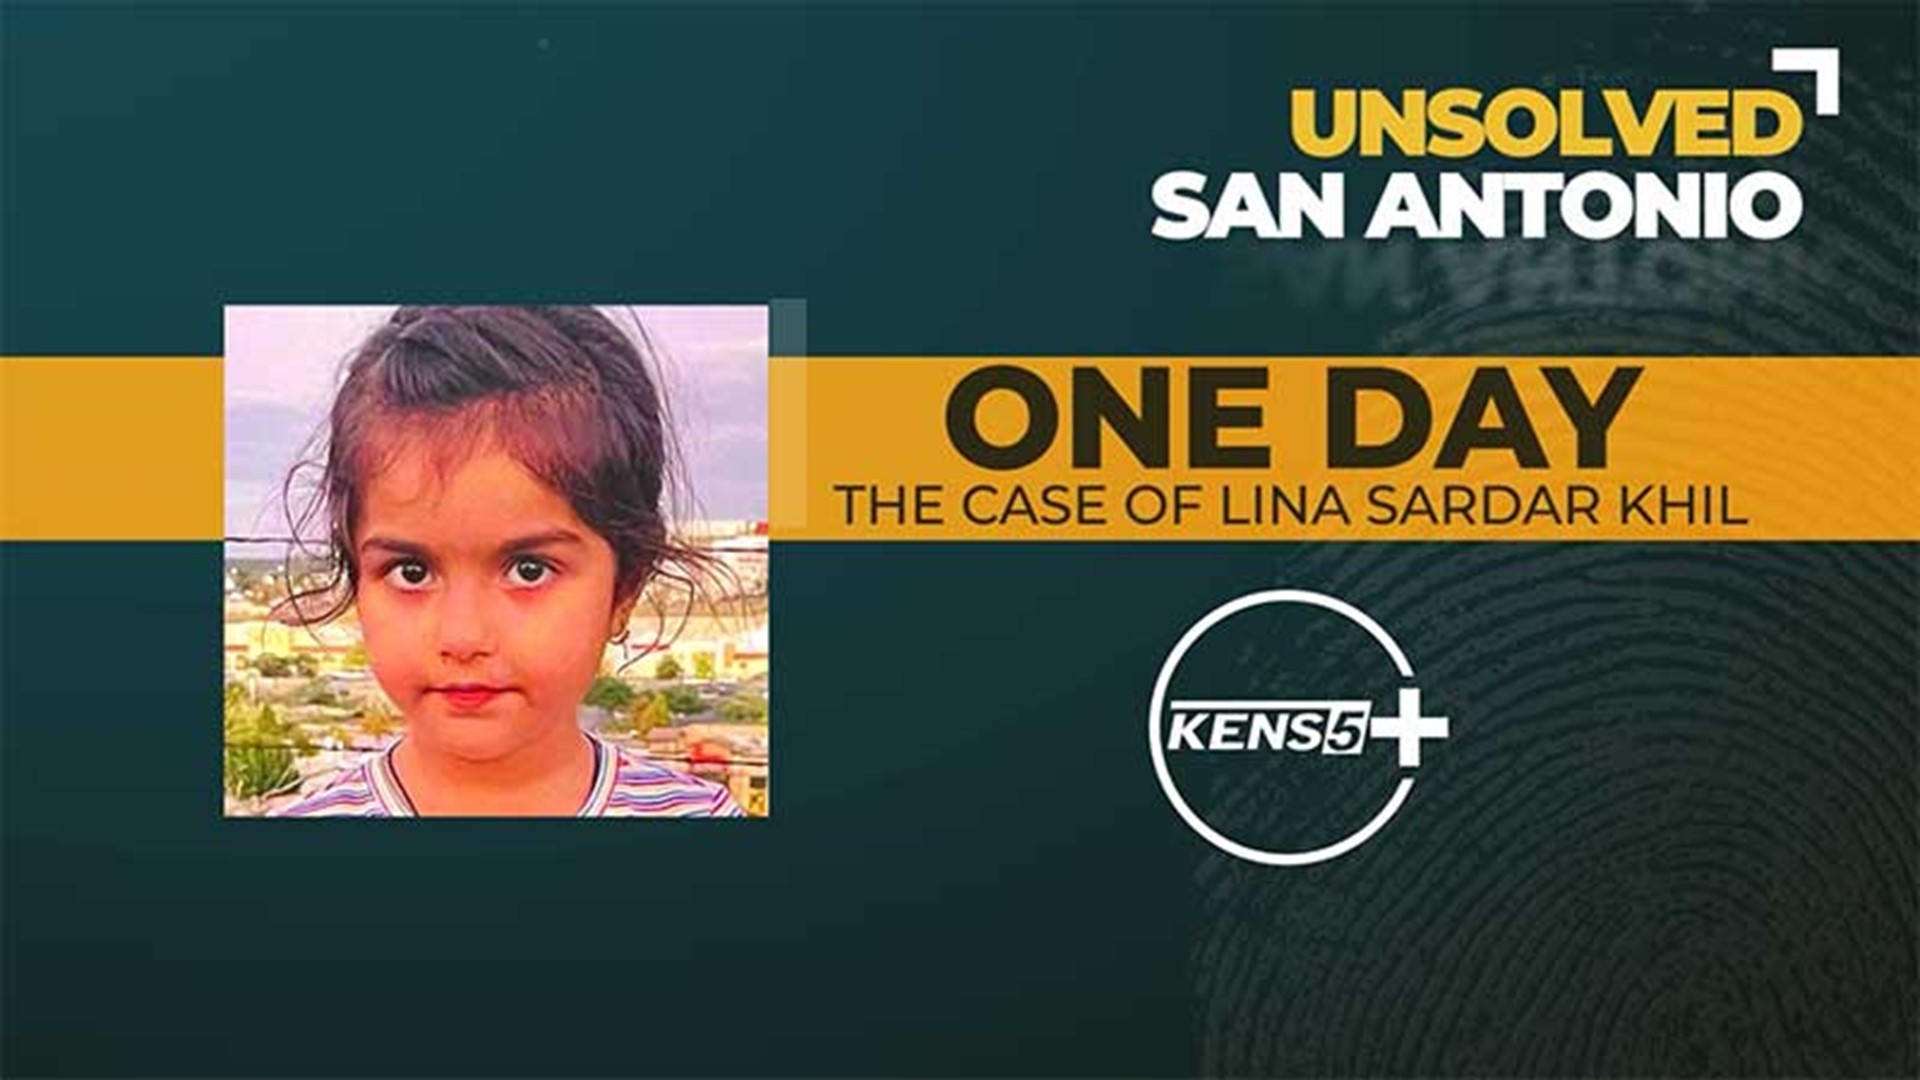 3-year-old Lina disappeared from a playground in December 2021. One year later, investigators have few leads, and her family is grasping for hope.